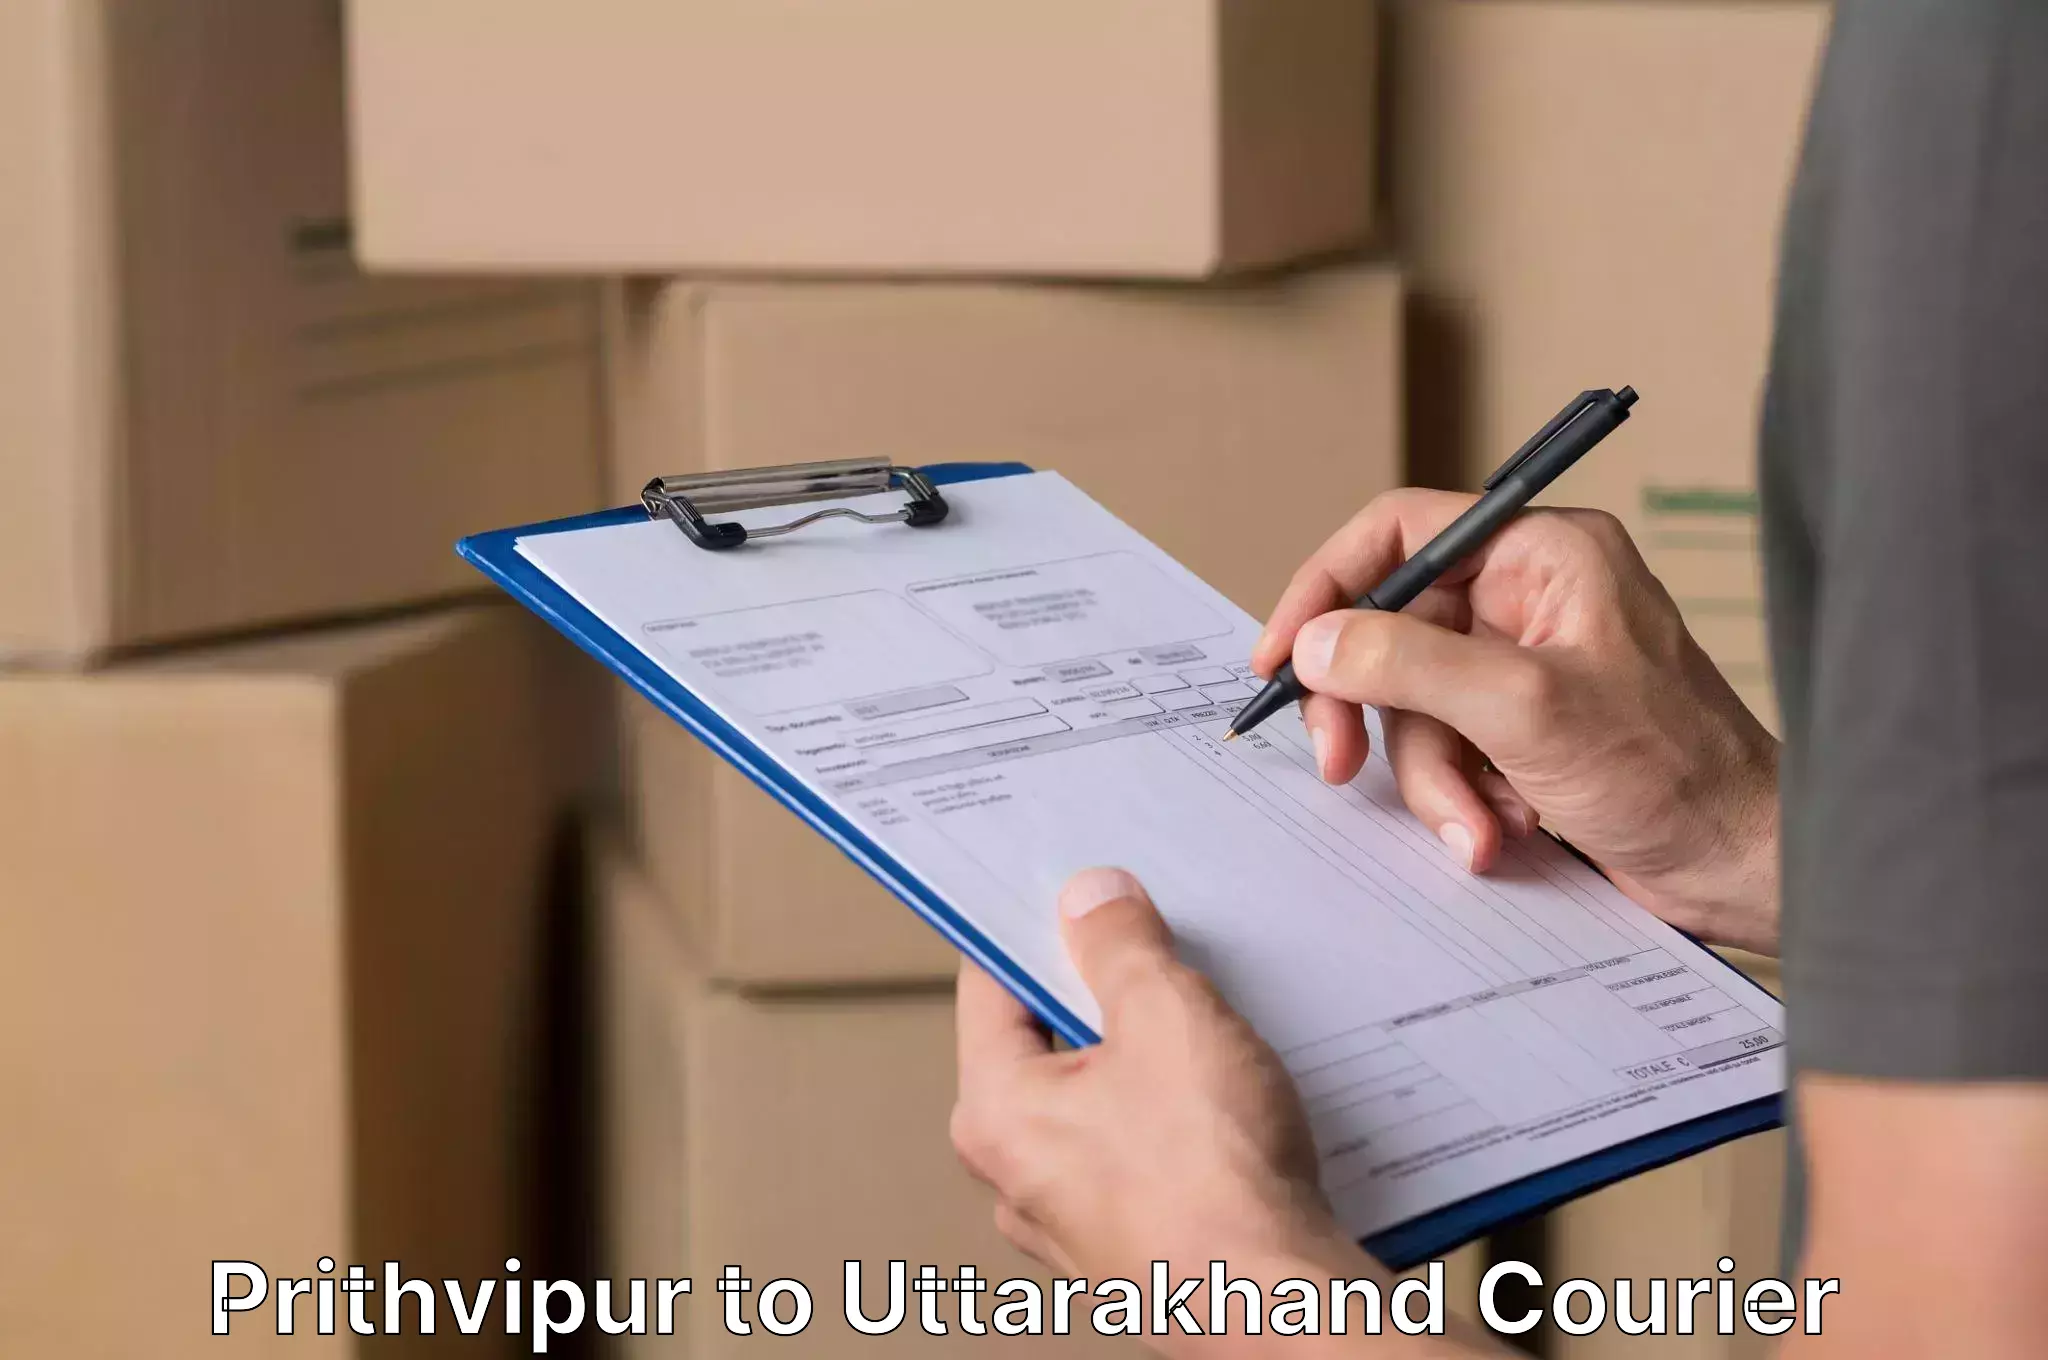 Dependable furniture movers in Prithvipur to Uttarakhand